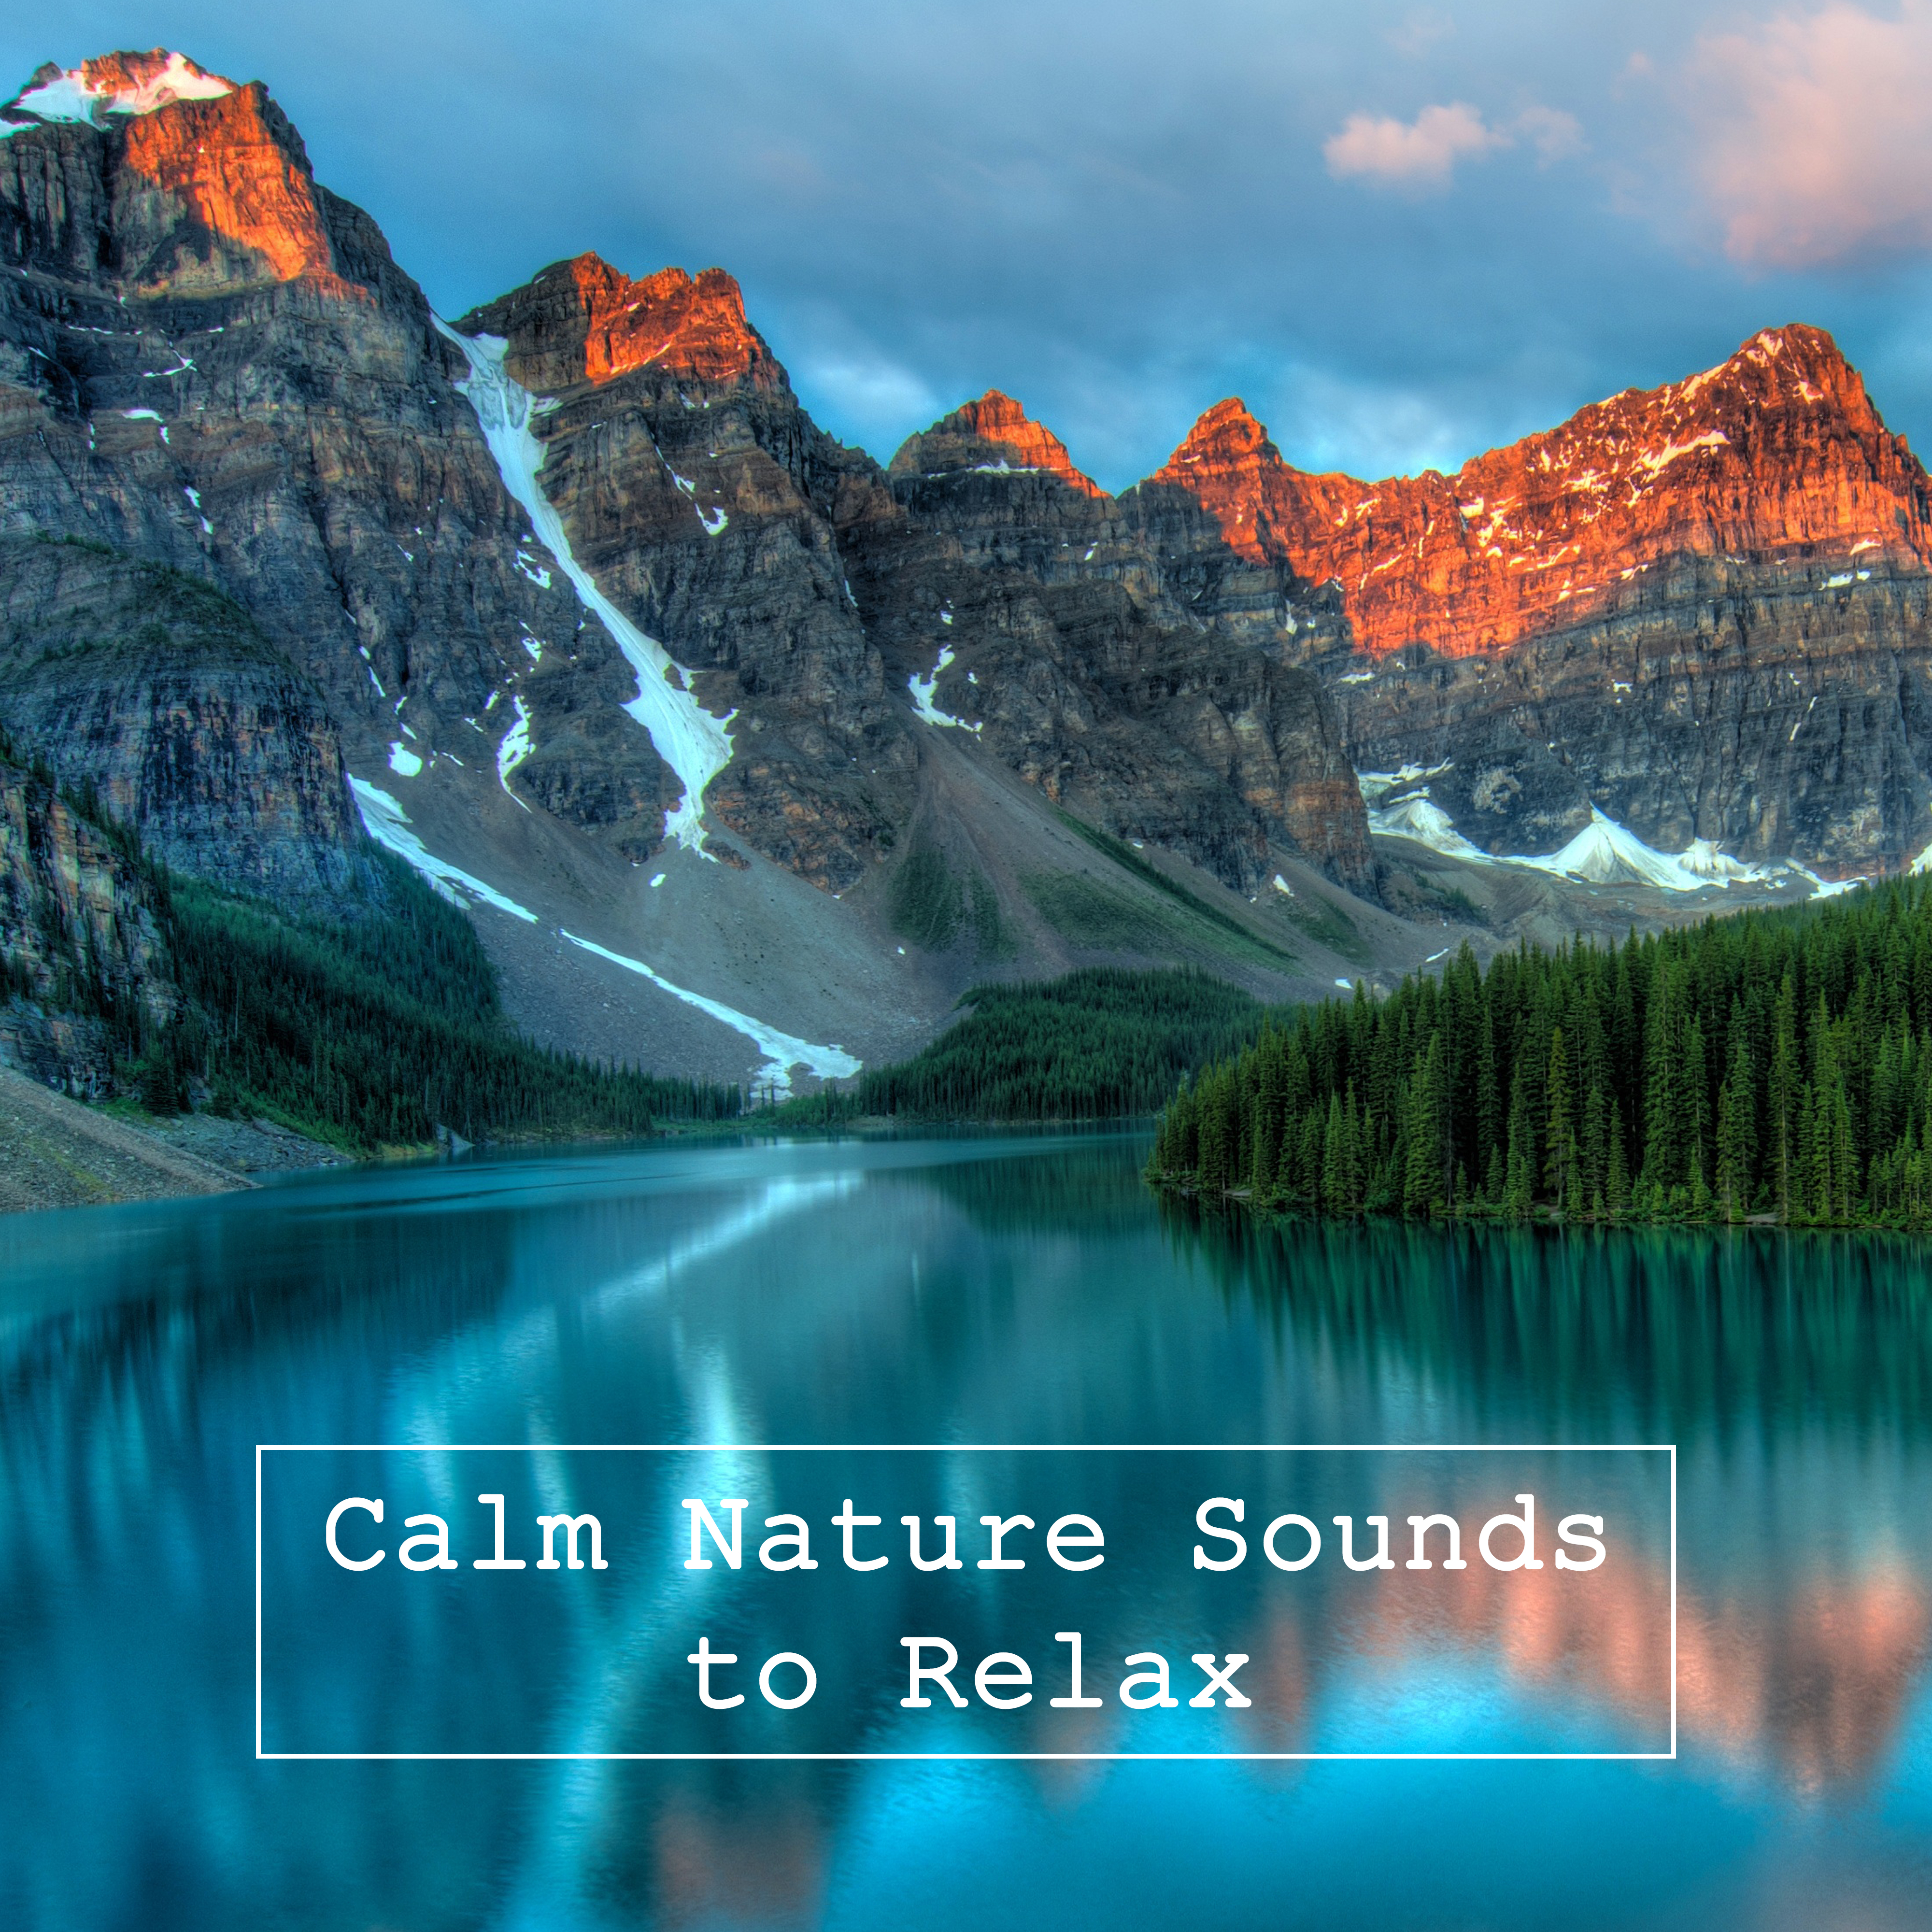 Calm Nature Sounds to Relax – Chilled Waves, Songs to Rest, Rain Sounds, Water Relaxation